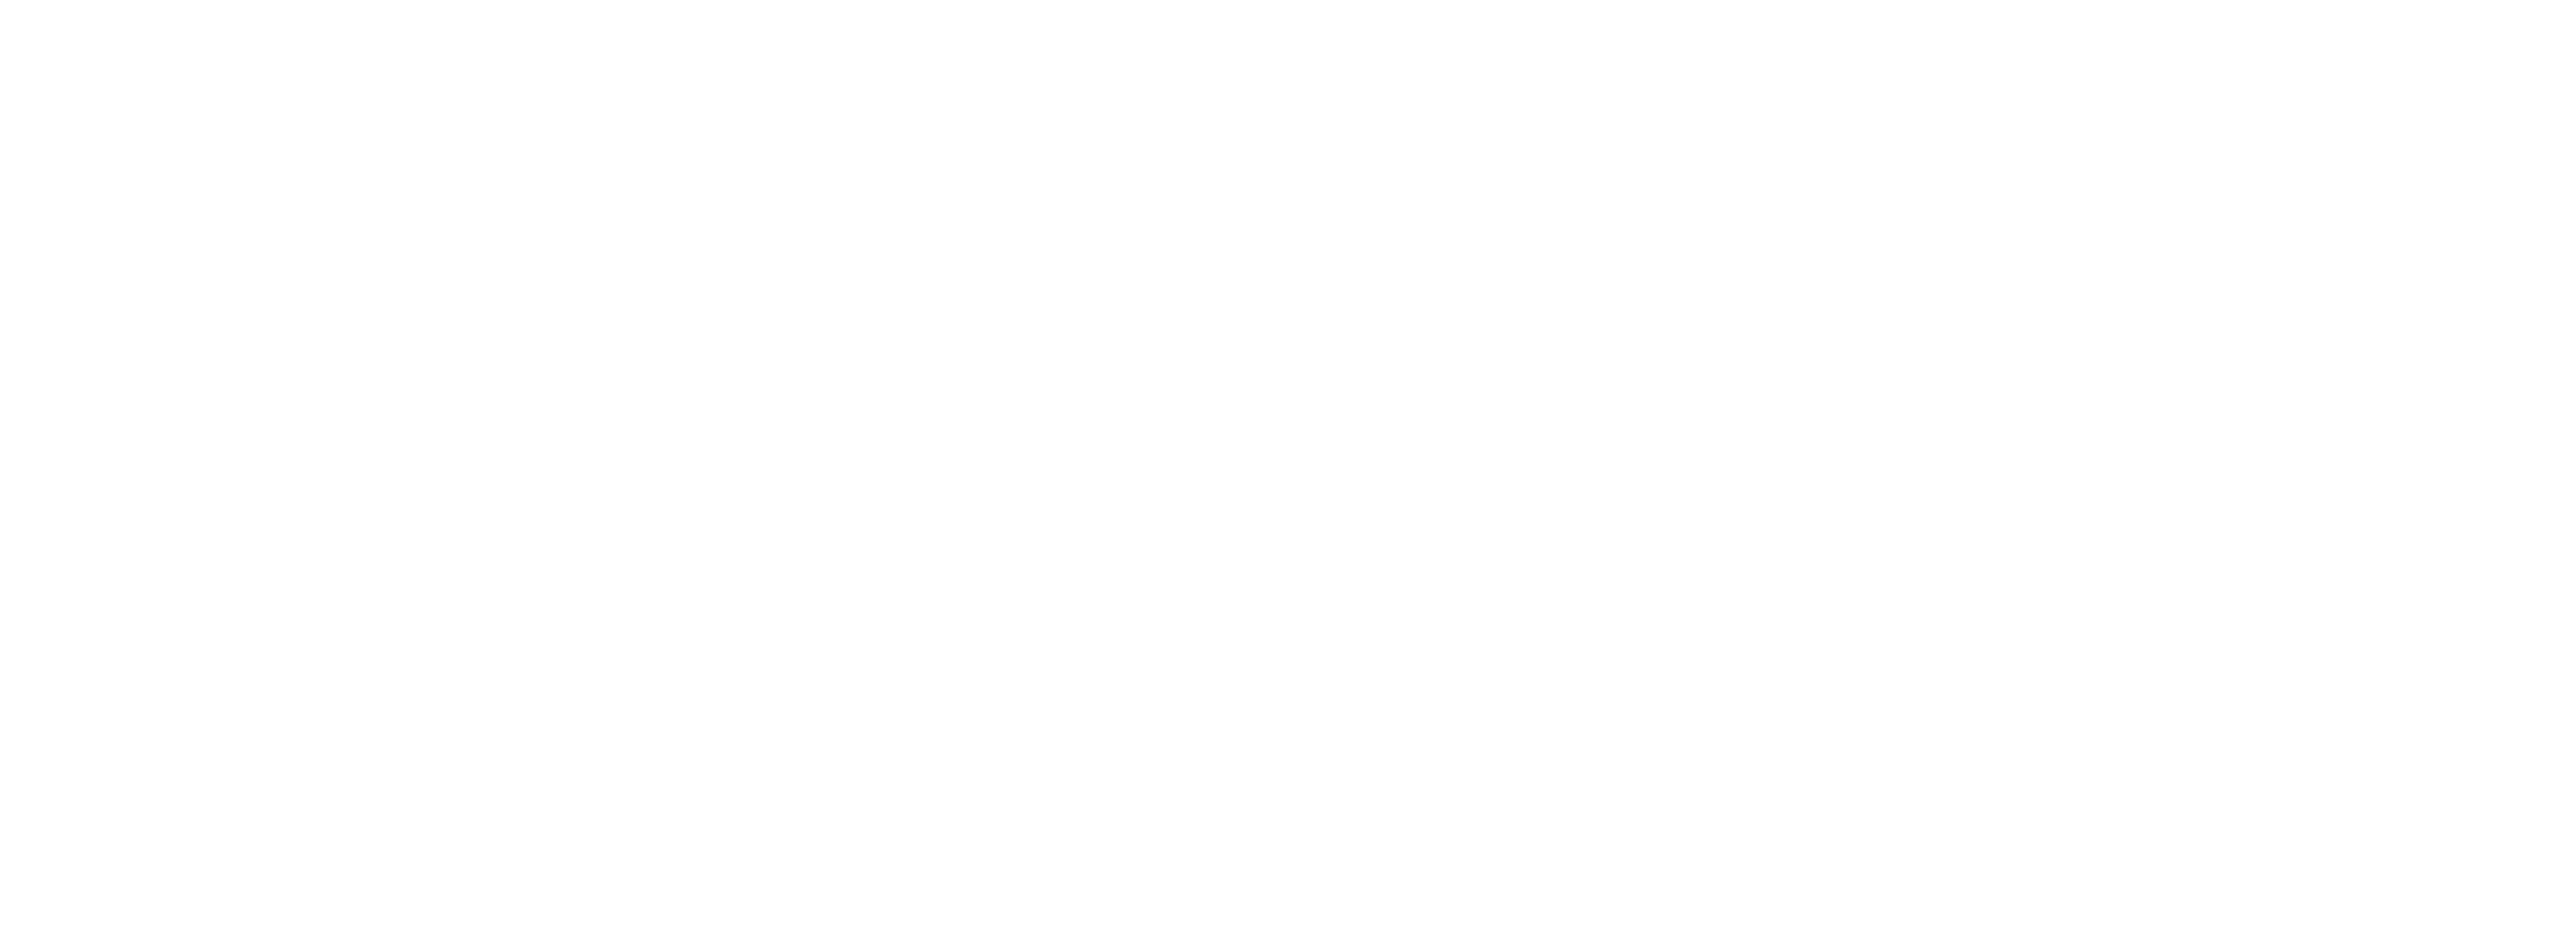 The Christmas Consultant logo